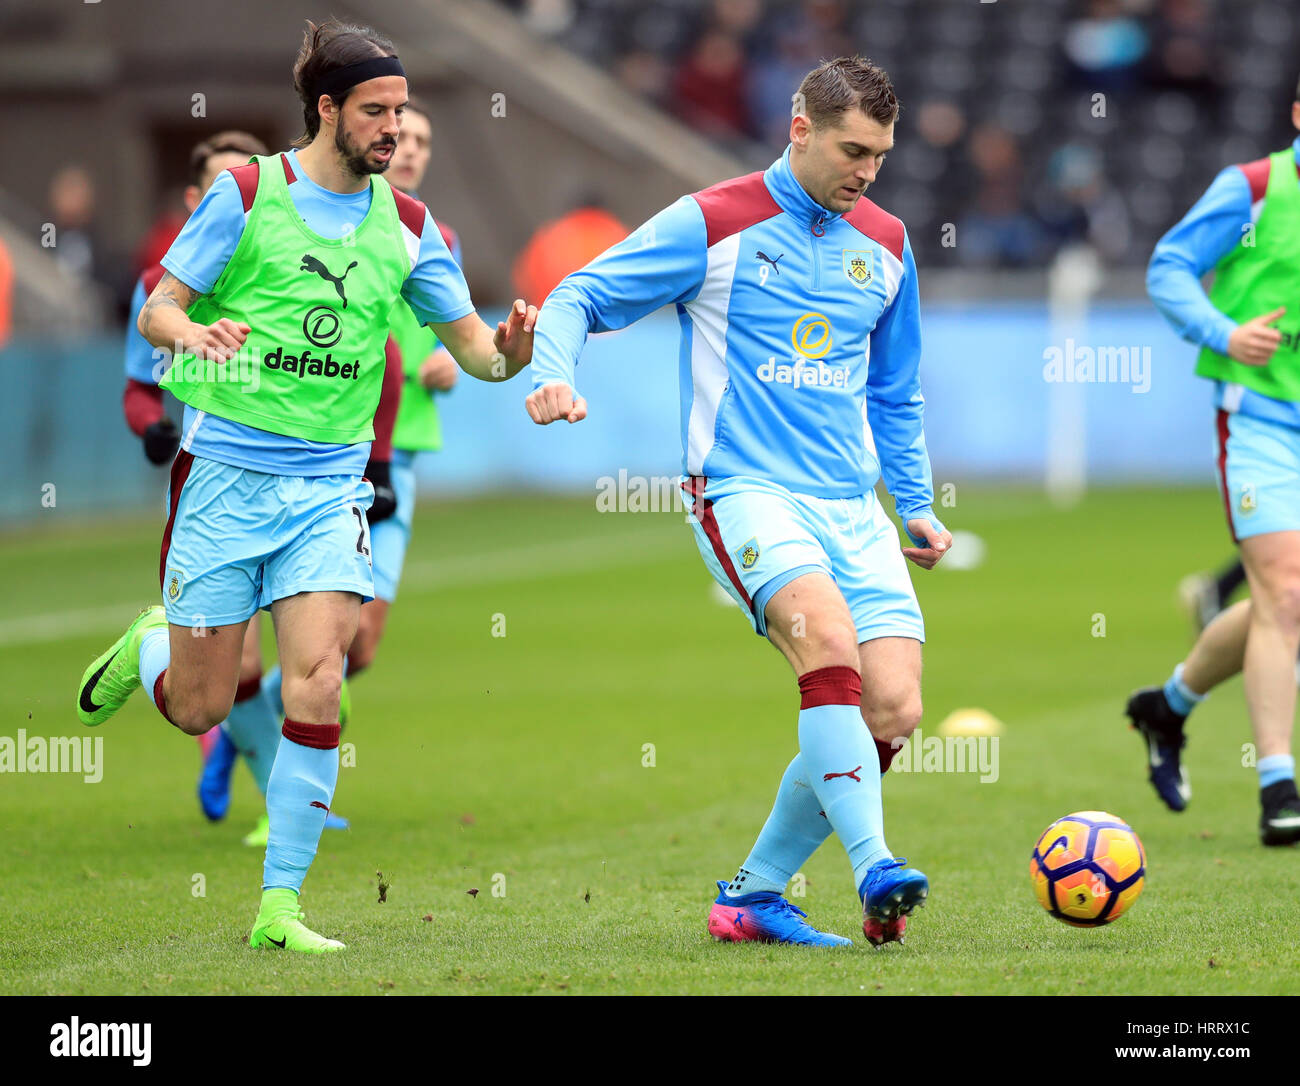 Burnley's George Boyd (left) and Sam Vokes during the Premier League match at the Liberty Stadium, Swansea. PRESS ASSOCIATION Photo. Picture date: Saturday March 4, 2017. See PA story SOCCER Swansea. Photo credit should read: Adam Davy/PA Wire. RESTRICTIONS: No use with unauthorised audio, video, data, fixture lists, club/league logos or 'live' services. Online in-match use limited to 75 images, no video emulation. No use in betting, games or single club/league/player publications. Stock Photo